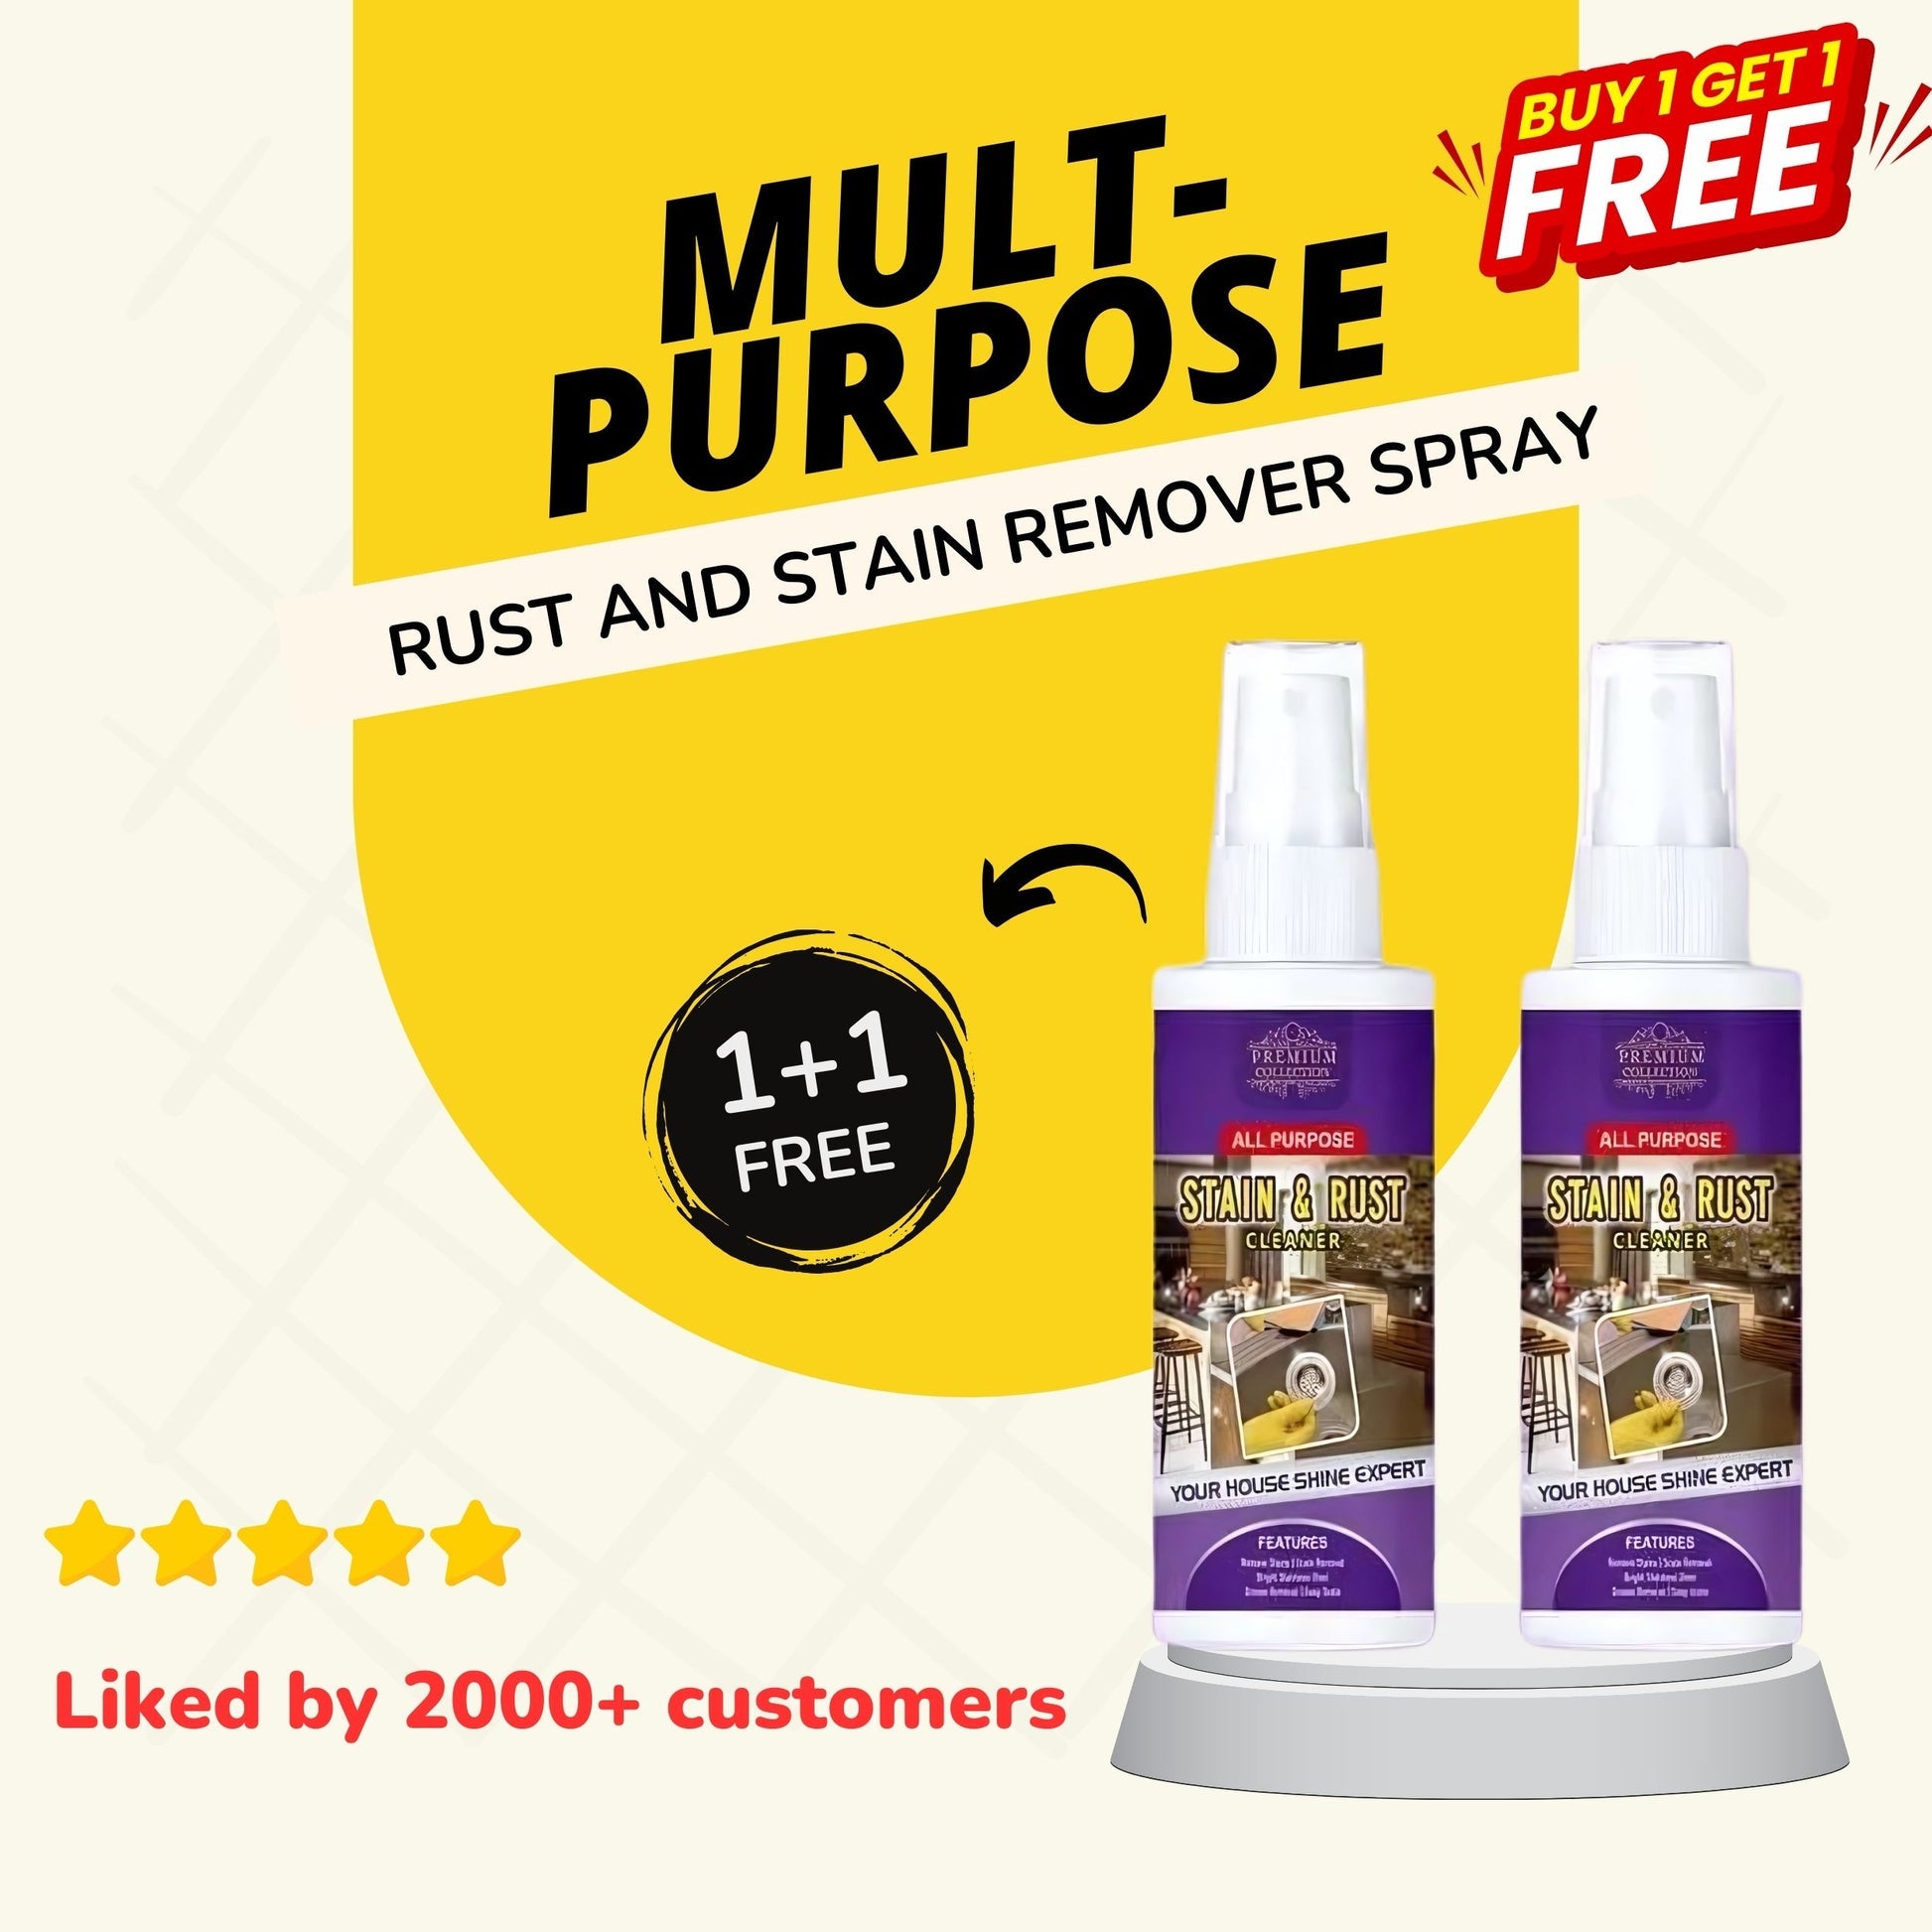 Multipurpose Rust & Stain Remover Spray (Buy 1 Get 1 Free)